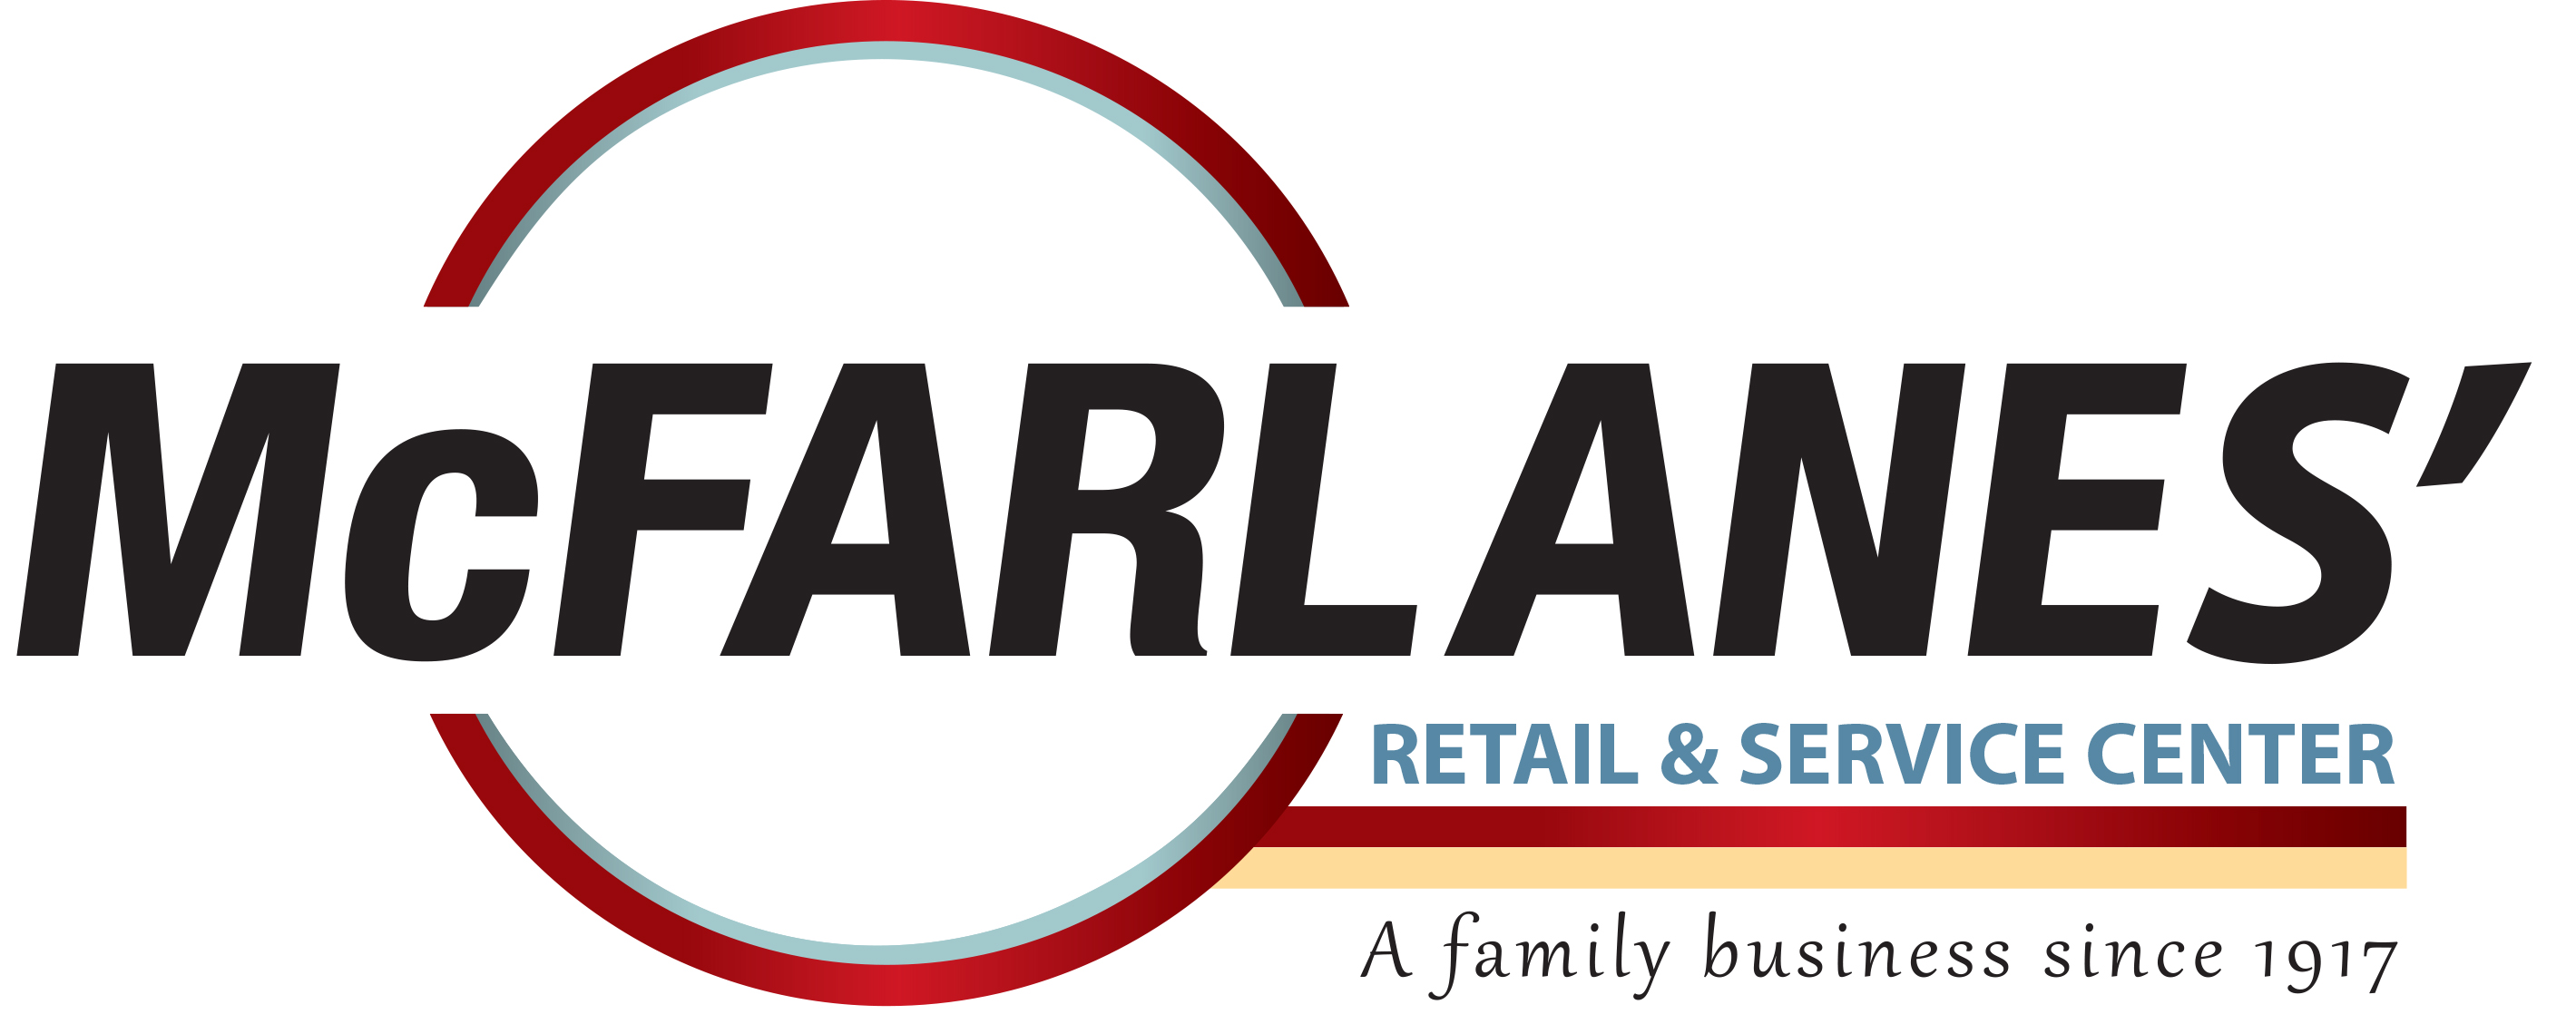 McFarlanes' Retail and Service Center